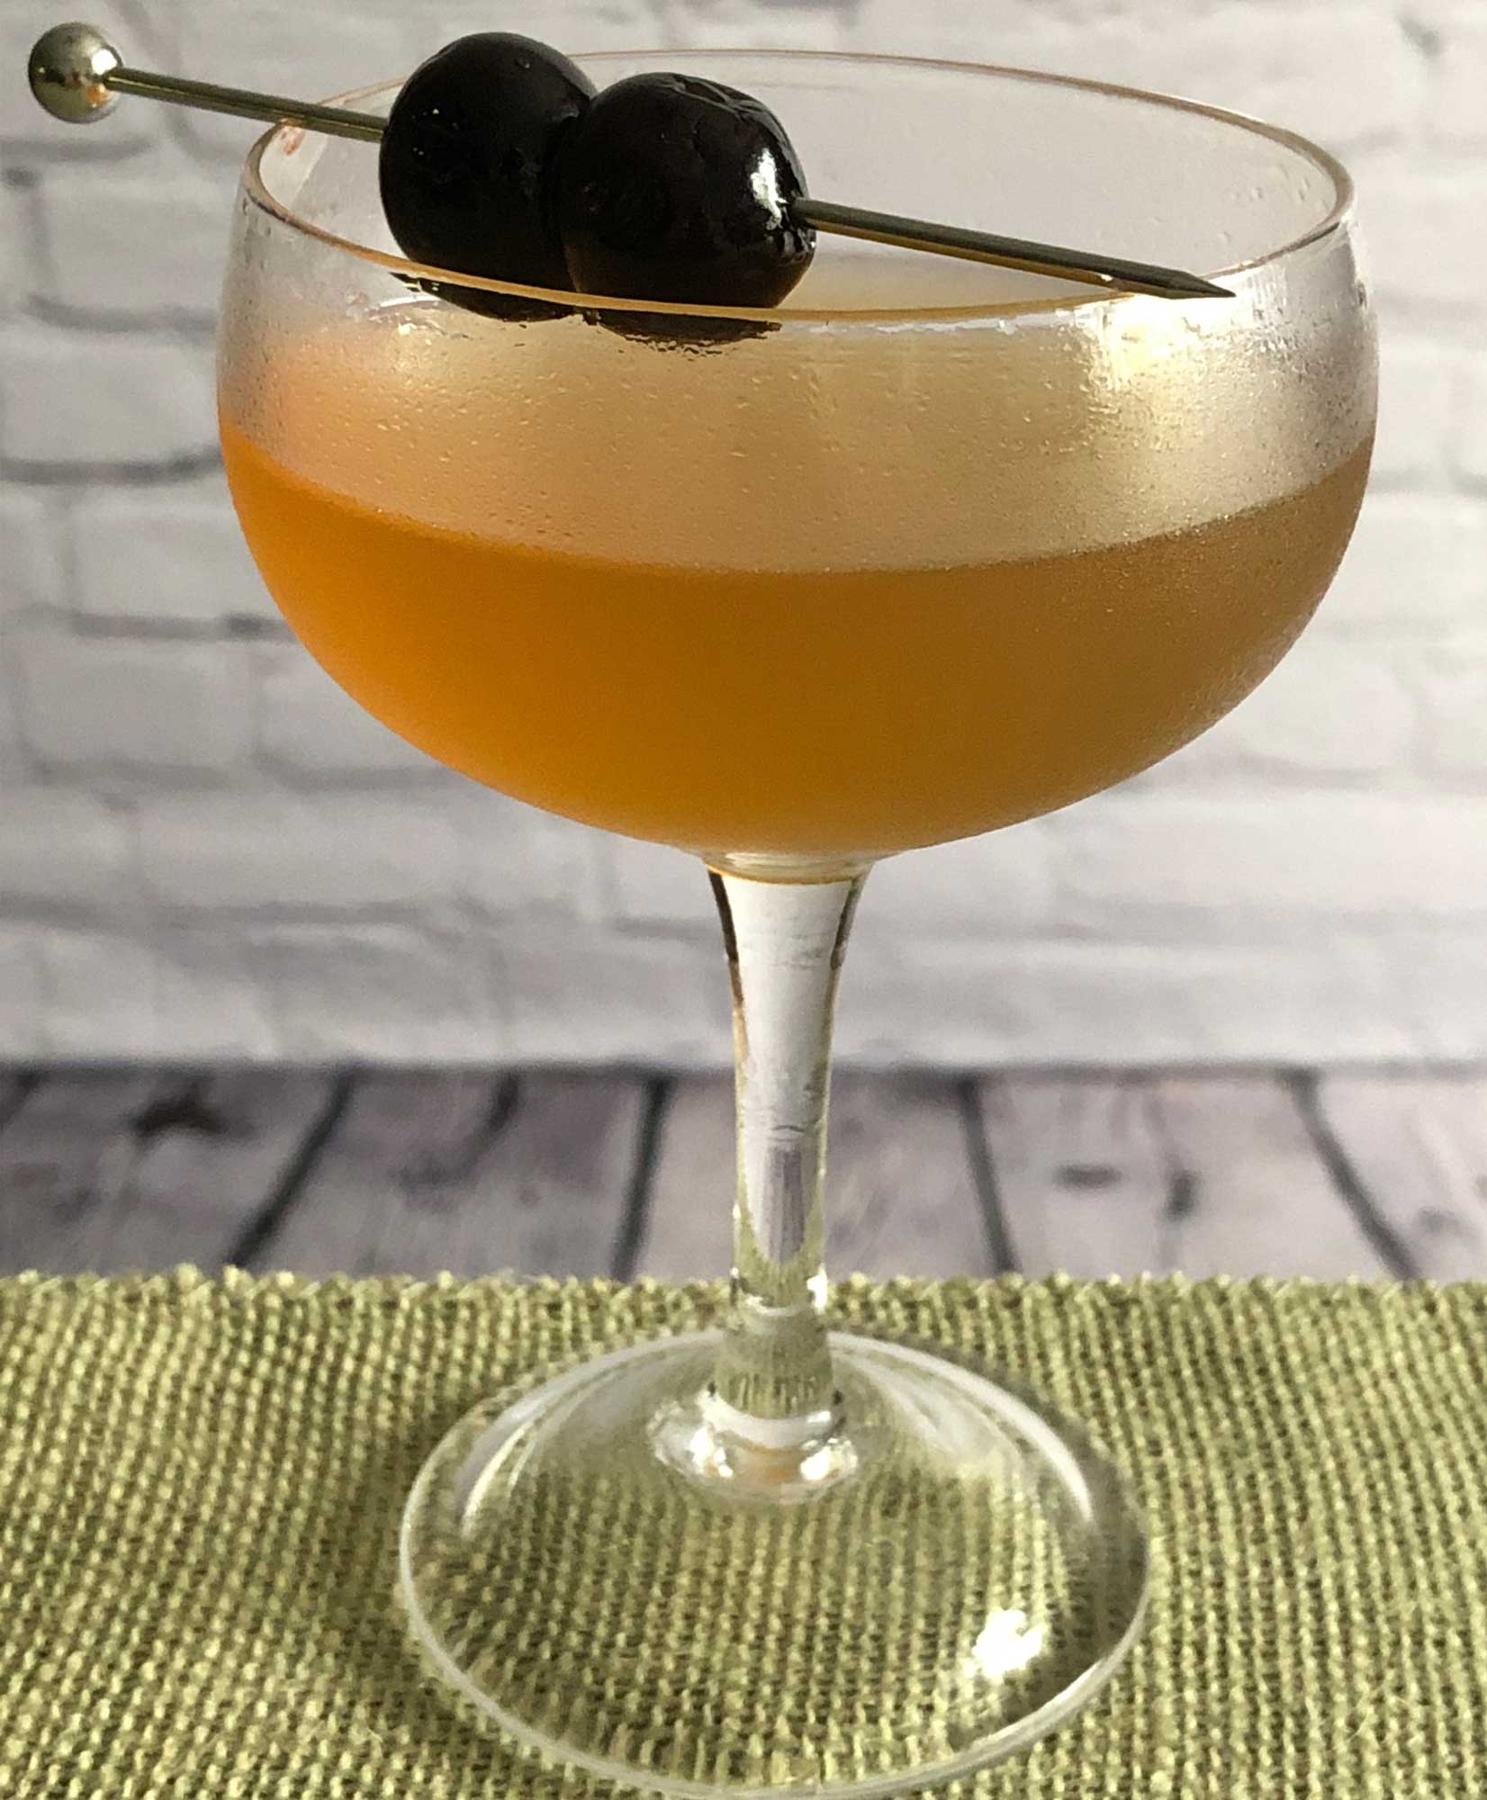 An example of the Core Reviver, the mixed drink (drink) featuring blended scotch whisky, Mattei Cap Corse Rouge Quinquina, Rothman & Winter Orchard Peach Liqueur, lemon juice, and maraschino cherry; photo by Lee Edwards